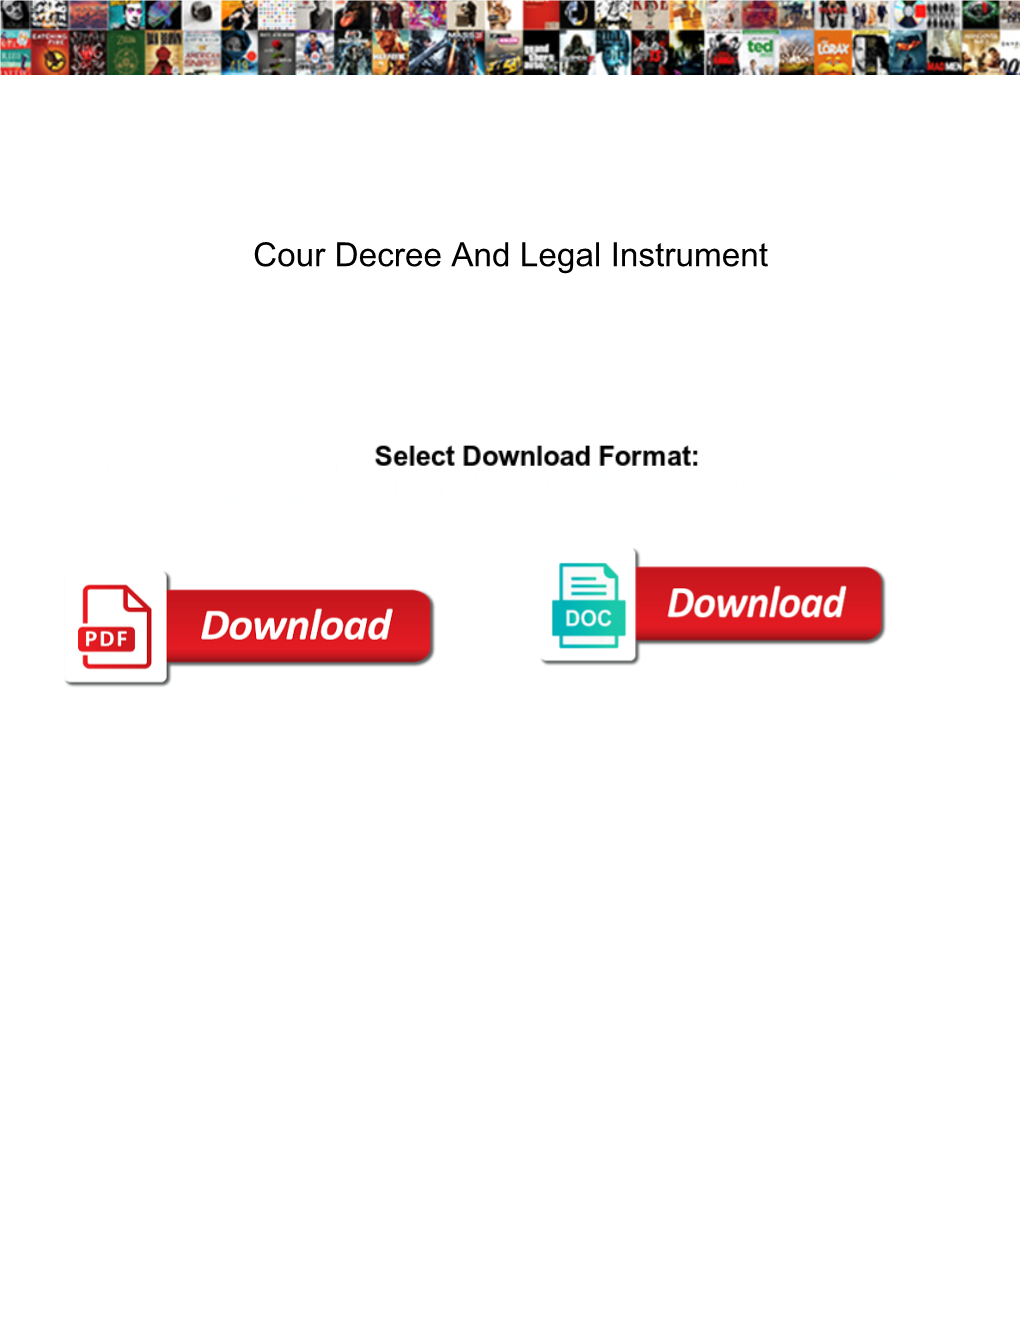 Cour Decree and Legal Instrument